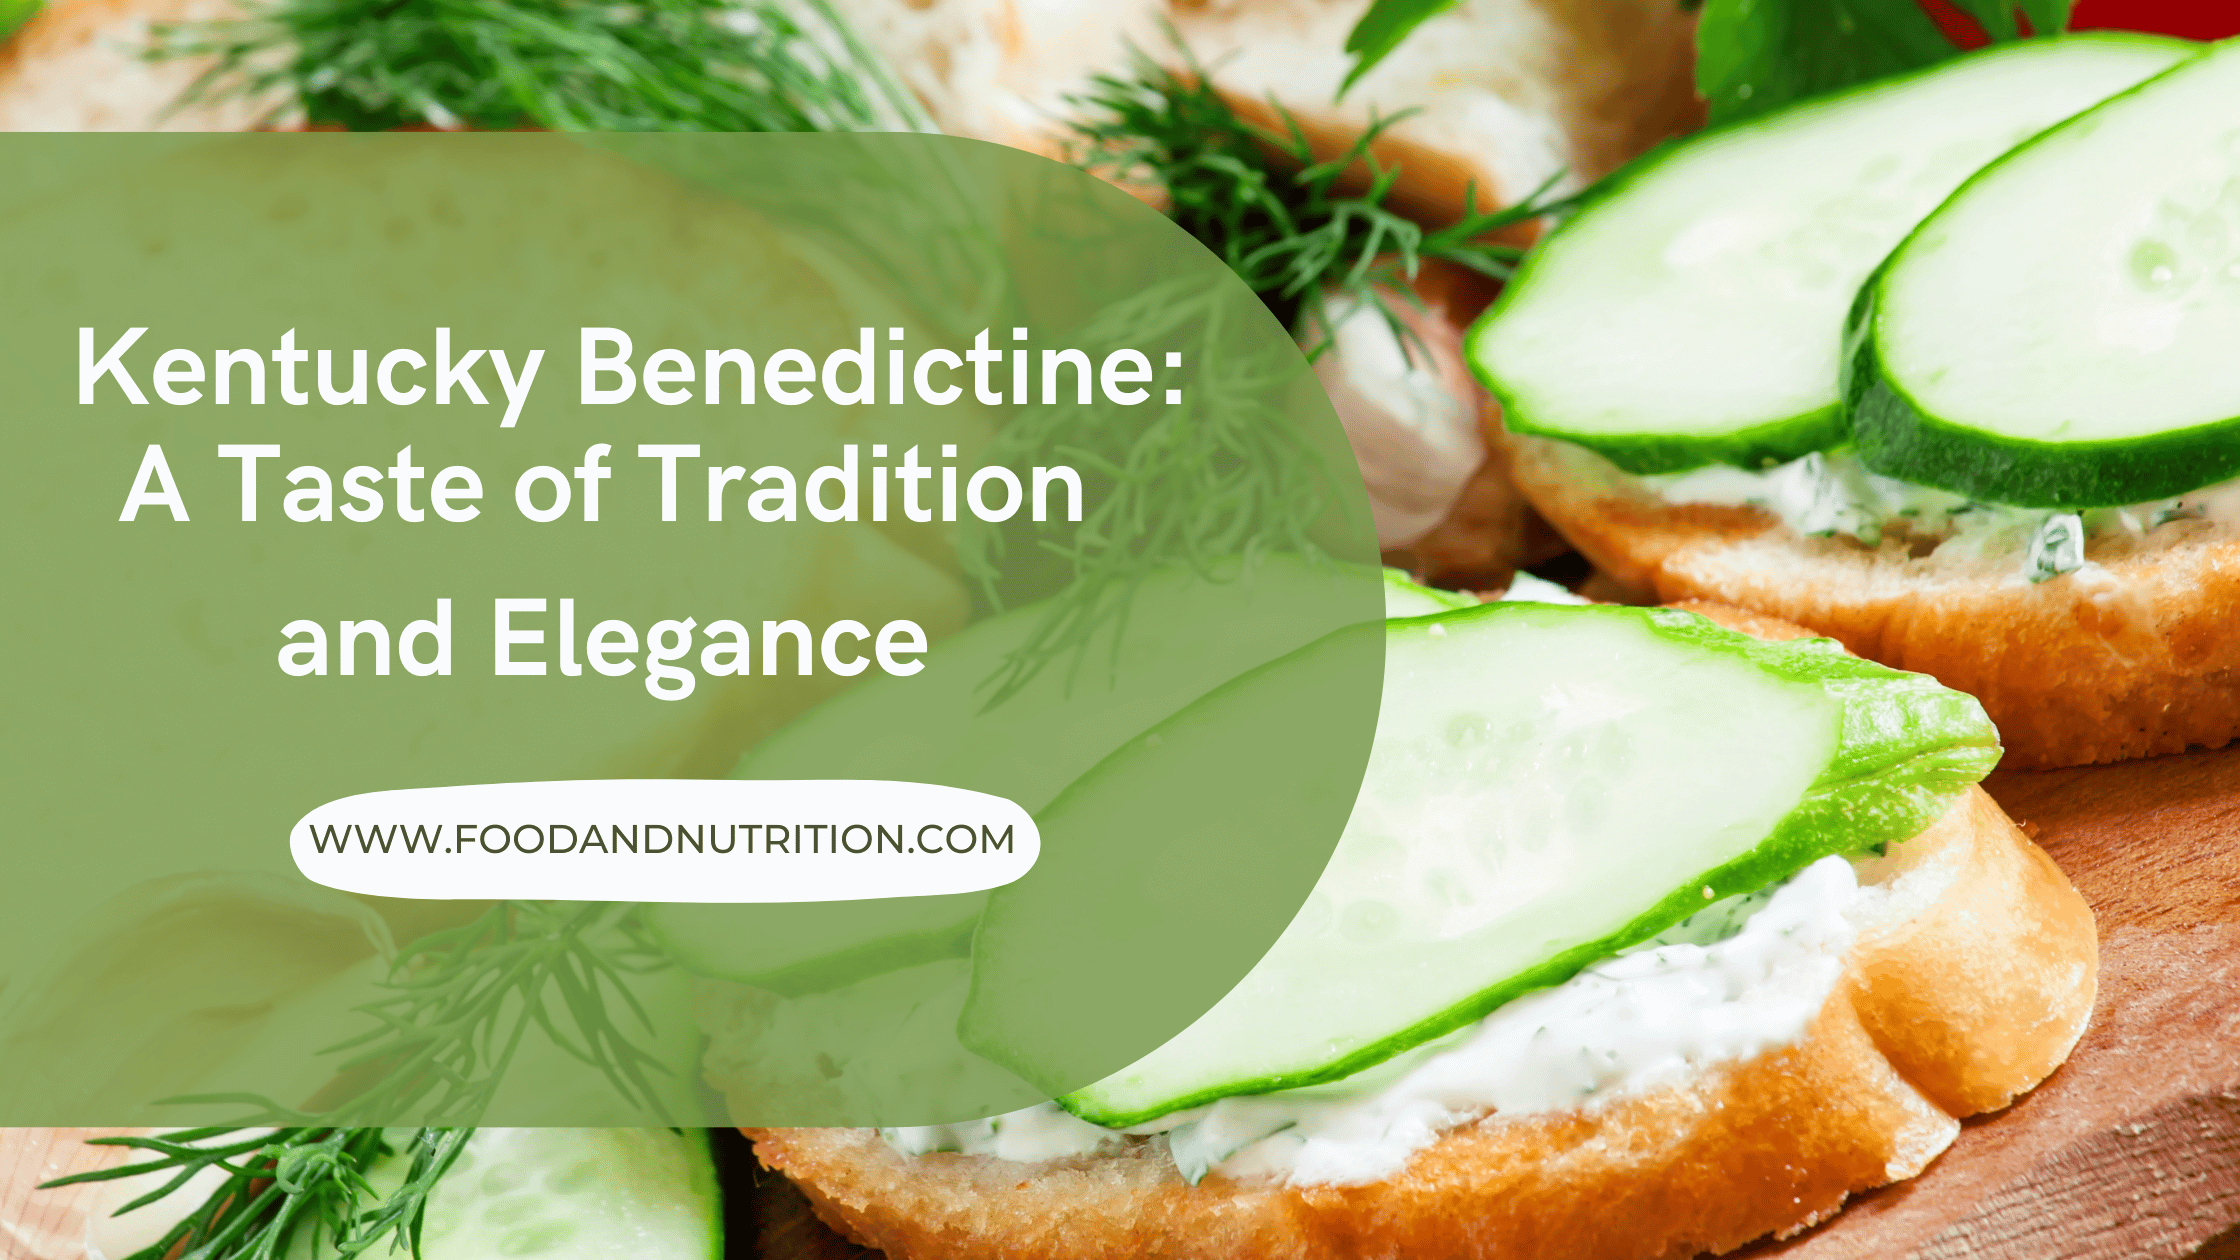 Kentucky Benedictine: A Taste of Tradition and Elegance